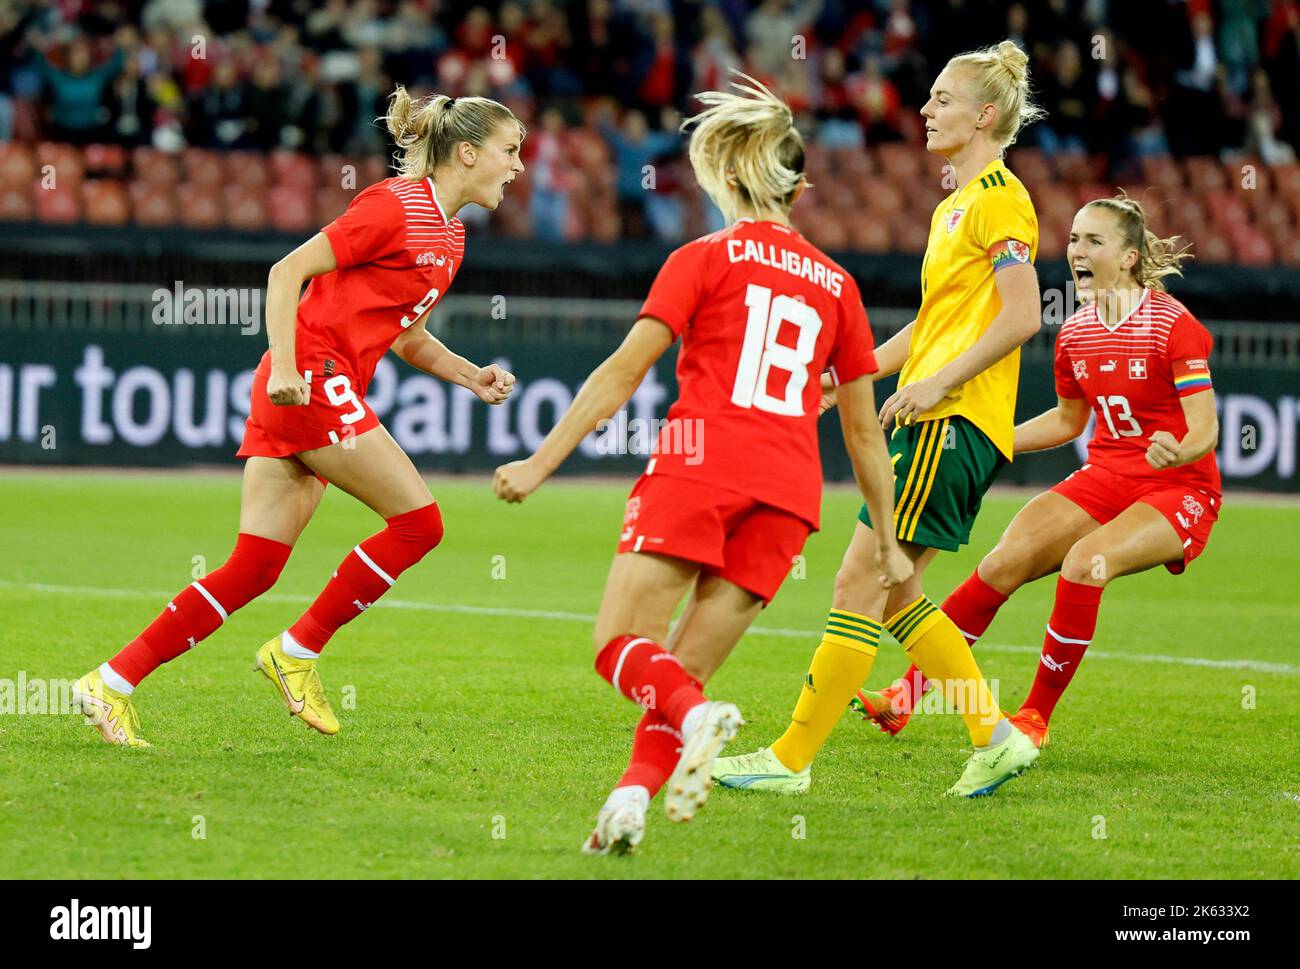 Soccer Football - FIFA Women's World Cup - UEFA Qualifiers - Switzerland v Wales - Stadion Letzigrund, Zurich, Switzerland - October 11, 2022 Switzerland's Ana-Maria Crnogorevic celebrates a goal before it is disallowed REUTERS/Stefan Wermuth Stock Photo